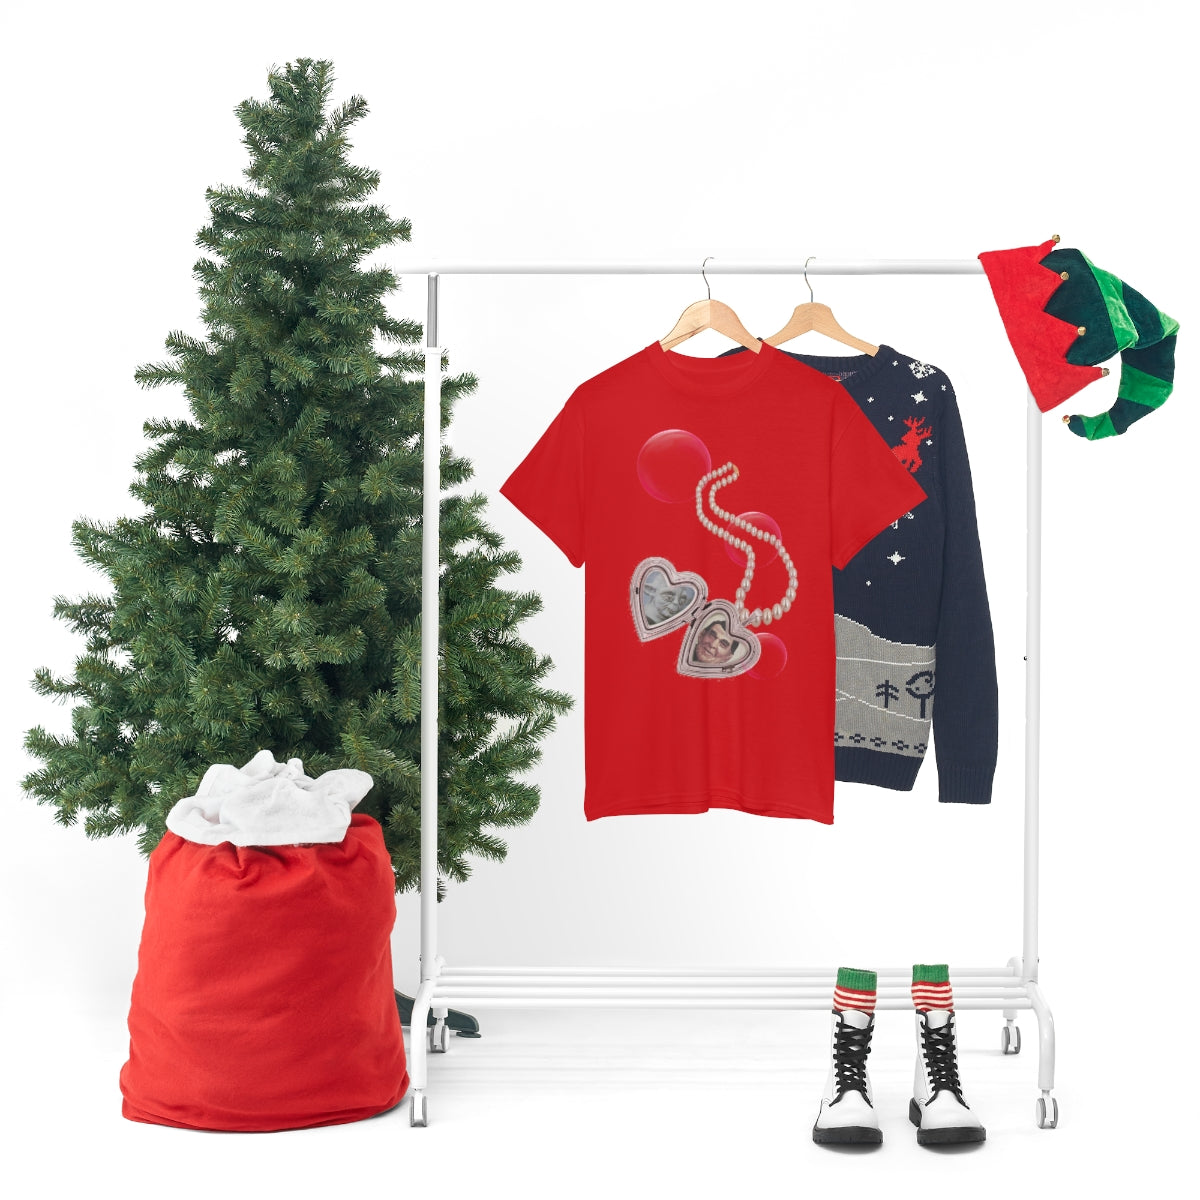 All Be Home for Christmas T-Shirt